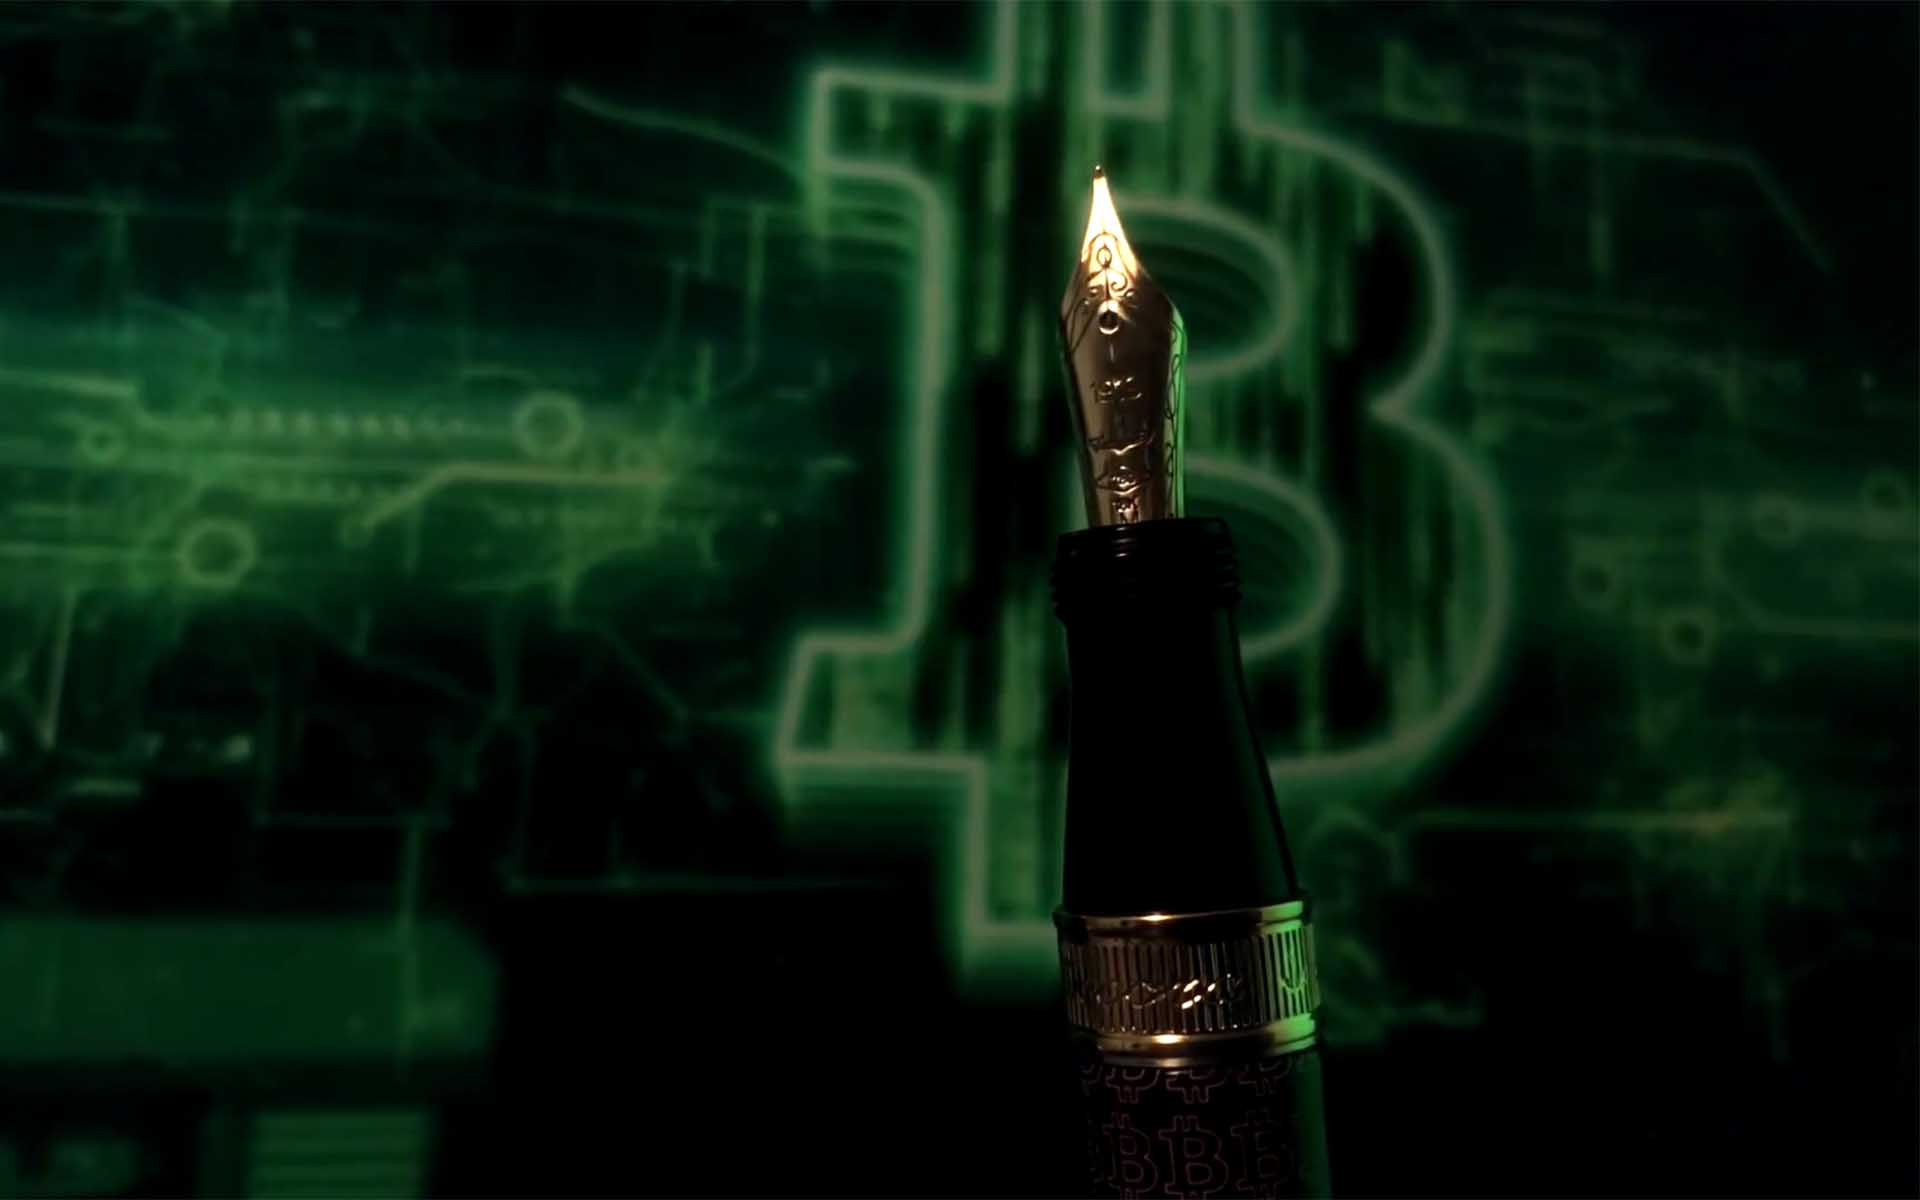 Limited Edition Bitcoin Pens: A New Type of IPO (Initial Pen Offering)